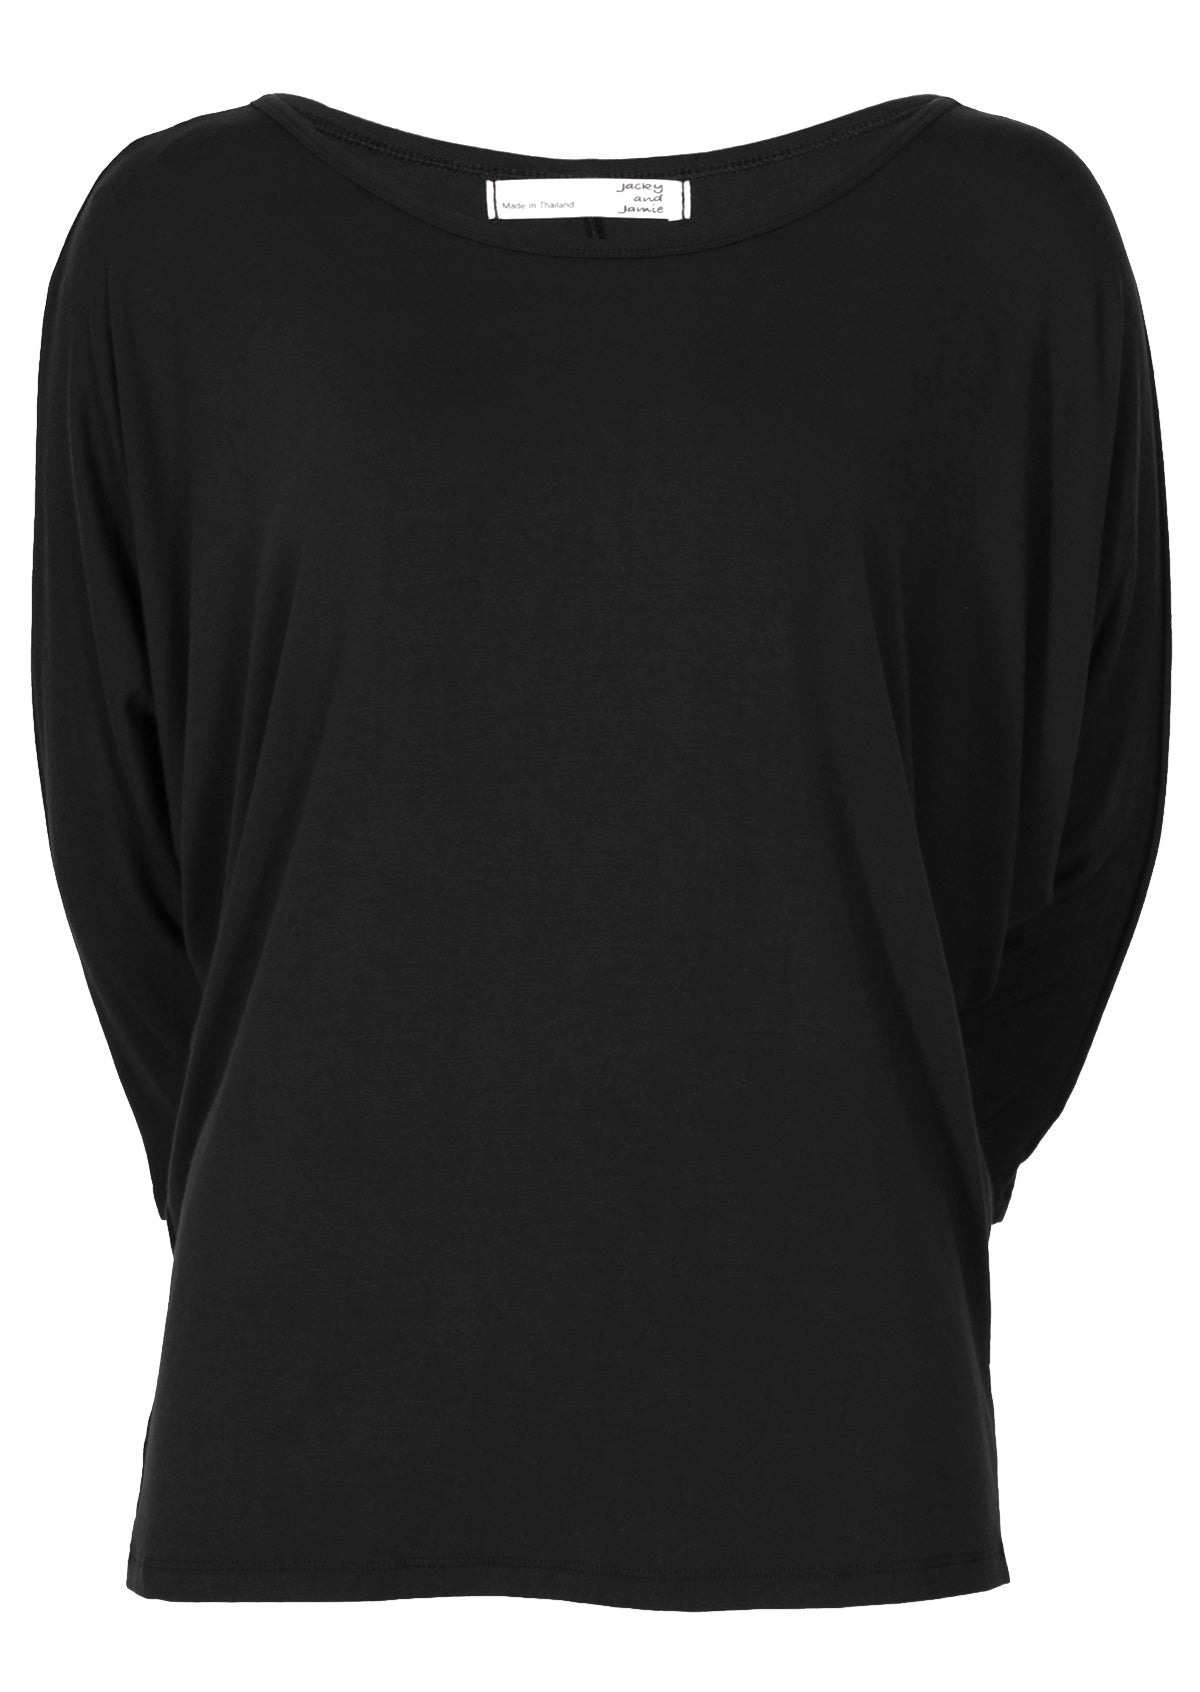 Front view women's 3/4 sleeve rayon batwing round neckline black top.